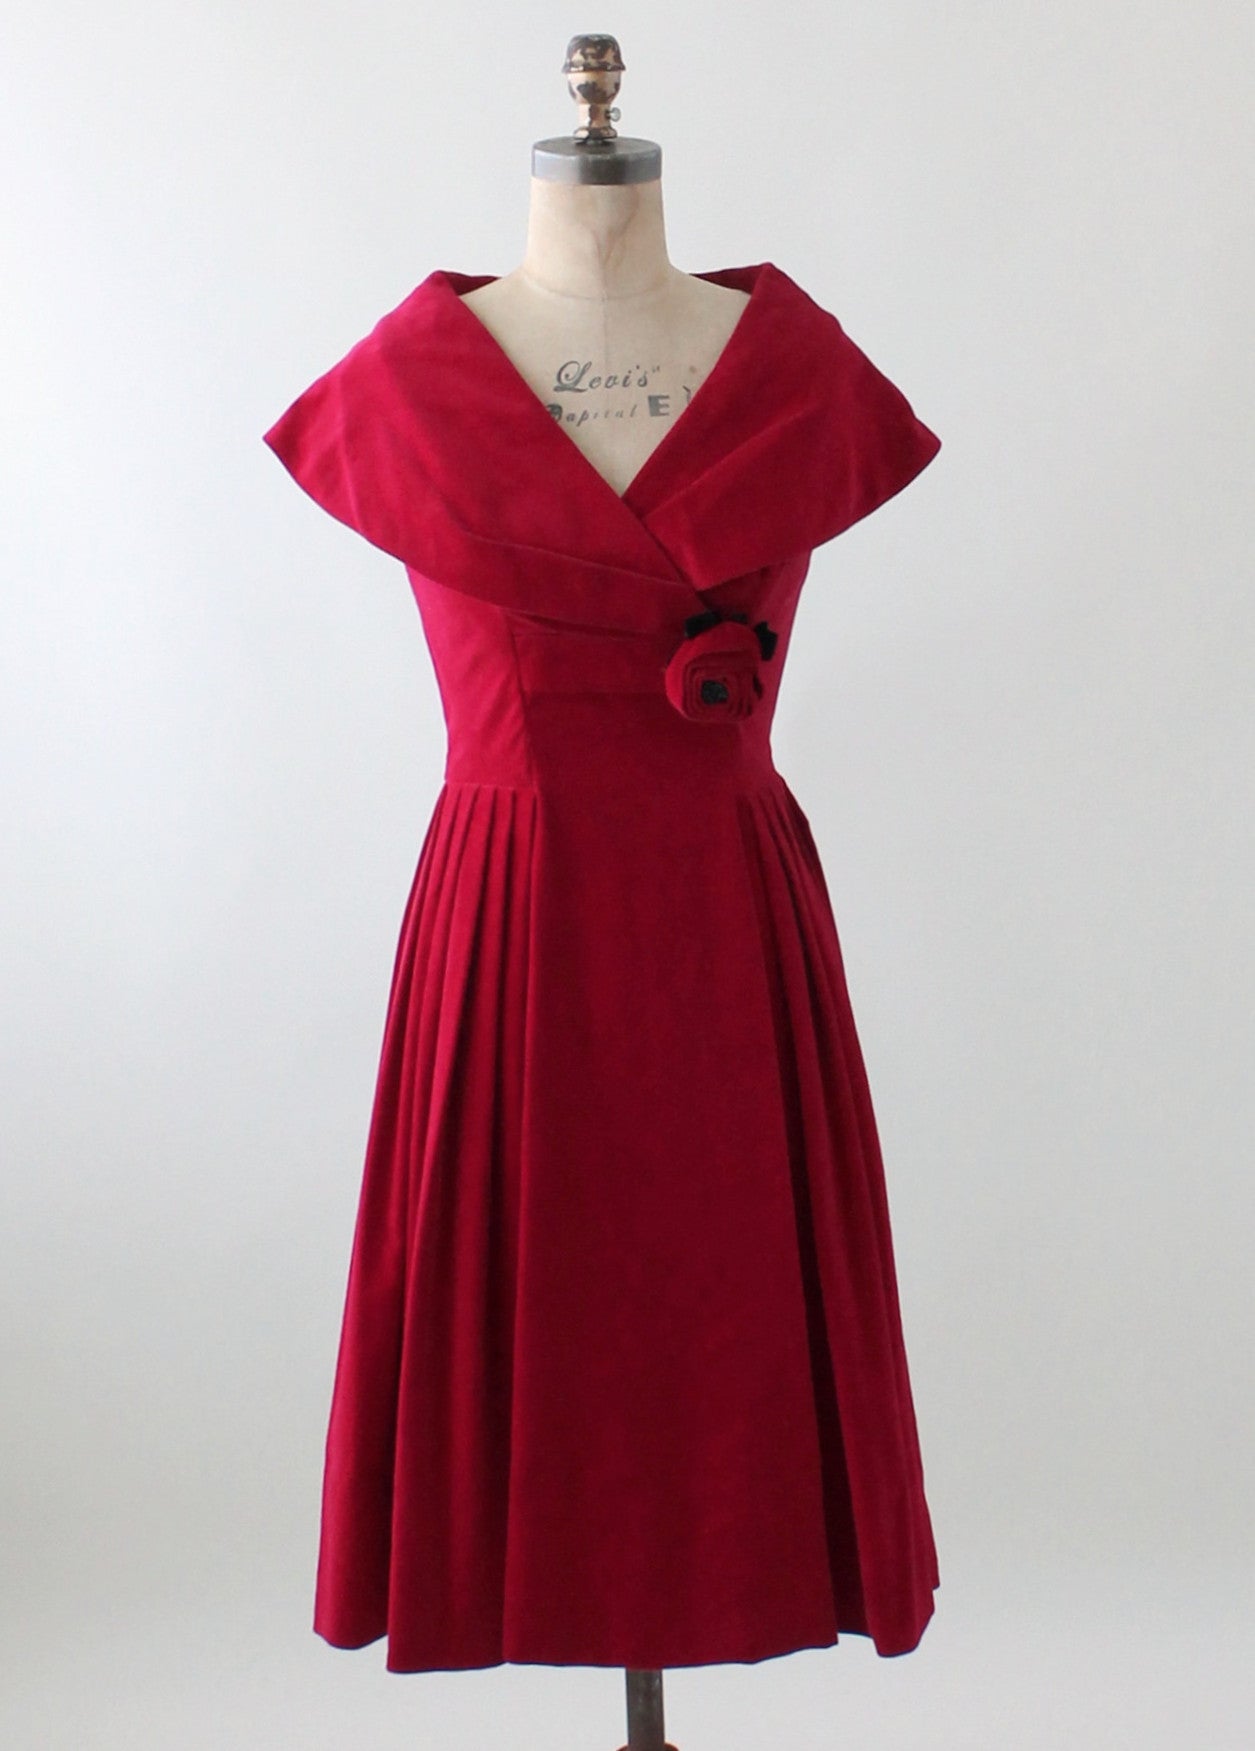 Vintage 1950s Red Velvet Holiday Party Dress Raleigh Vintage